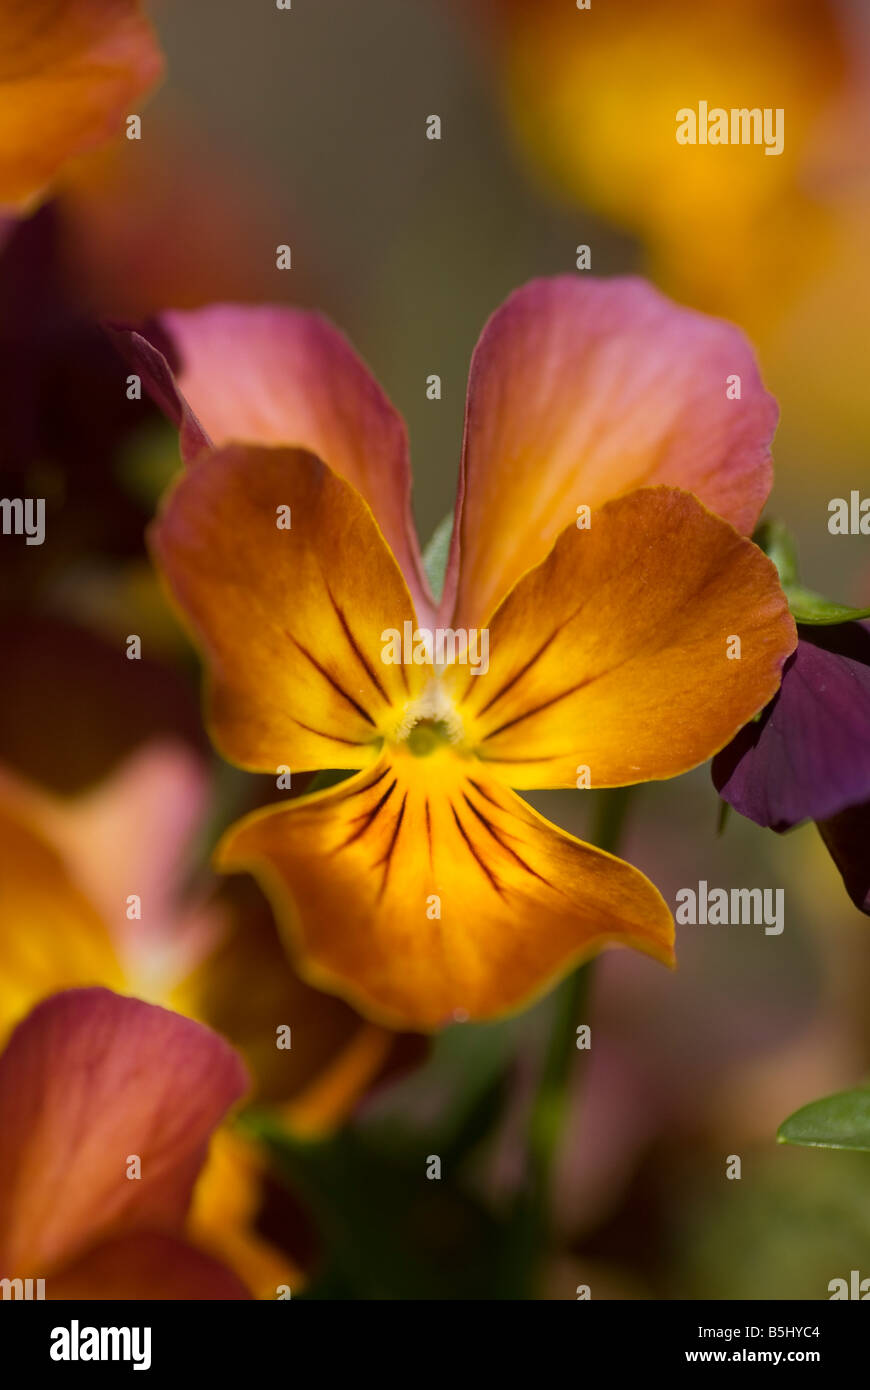 pansy violet flower Stock Photo